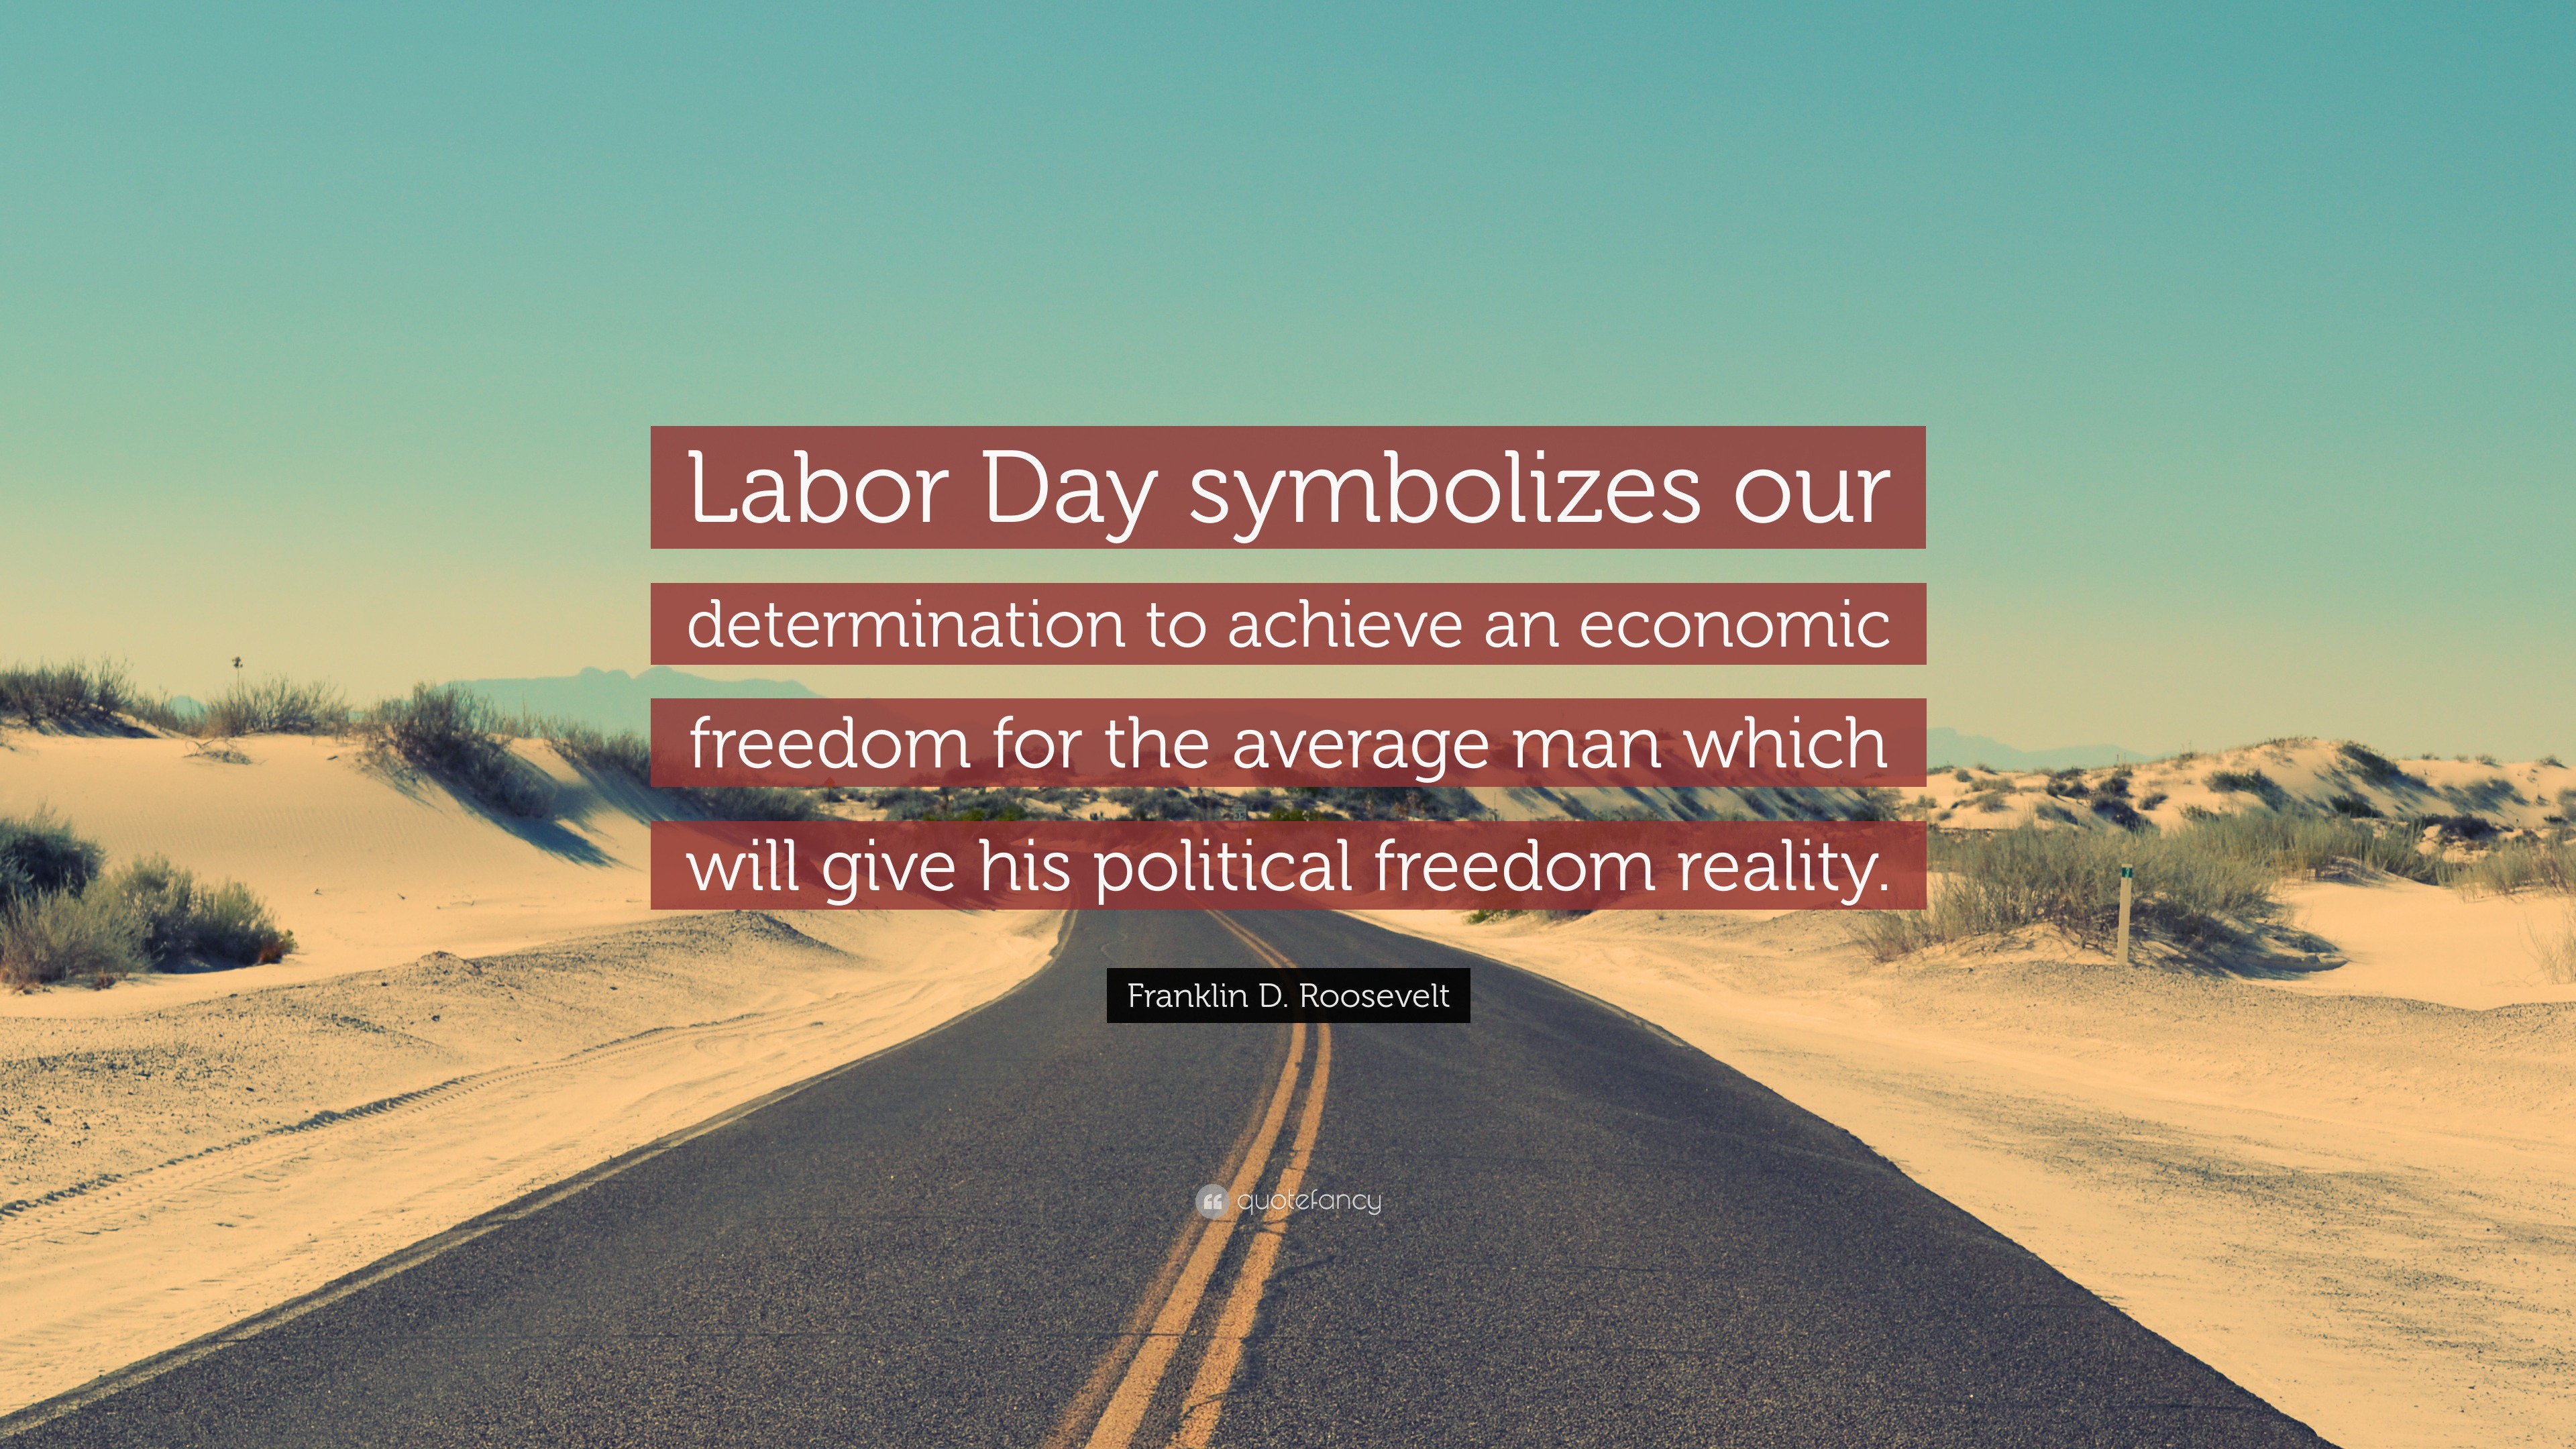 Franklin D. Roosevelt Quote “Labor Day symbolizes our determination to